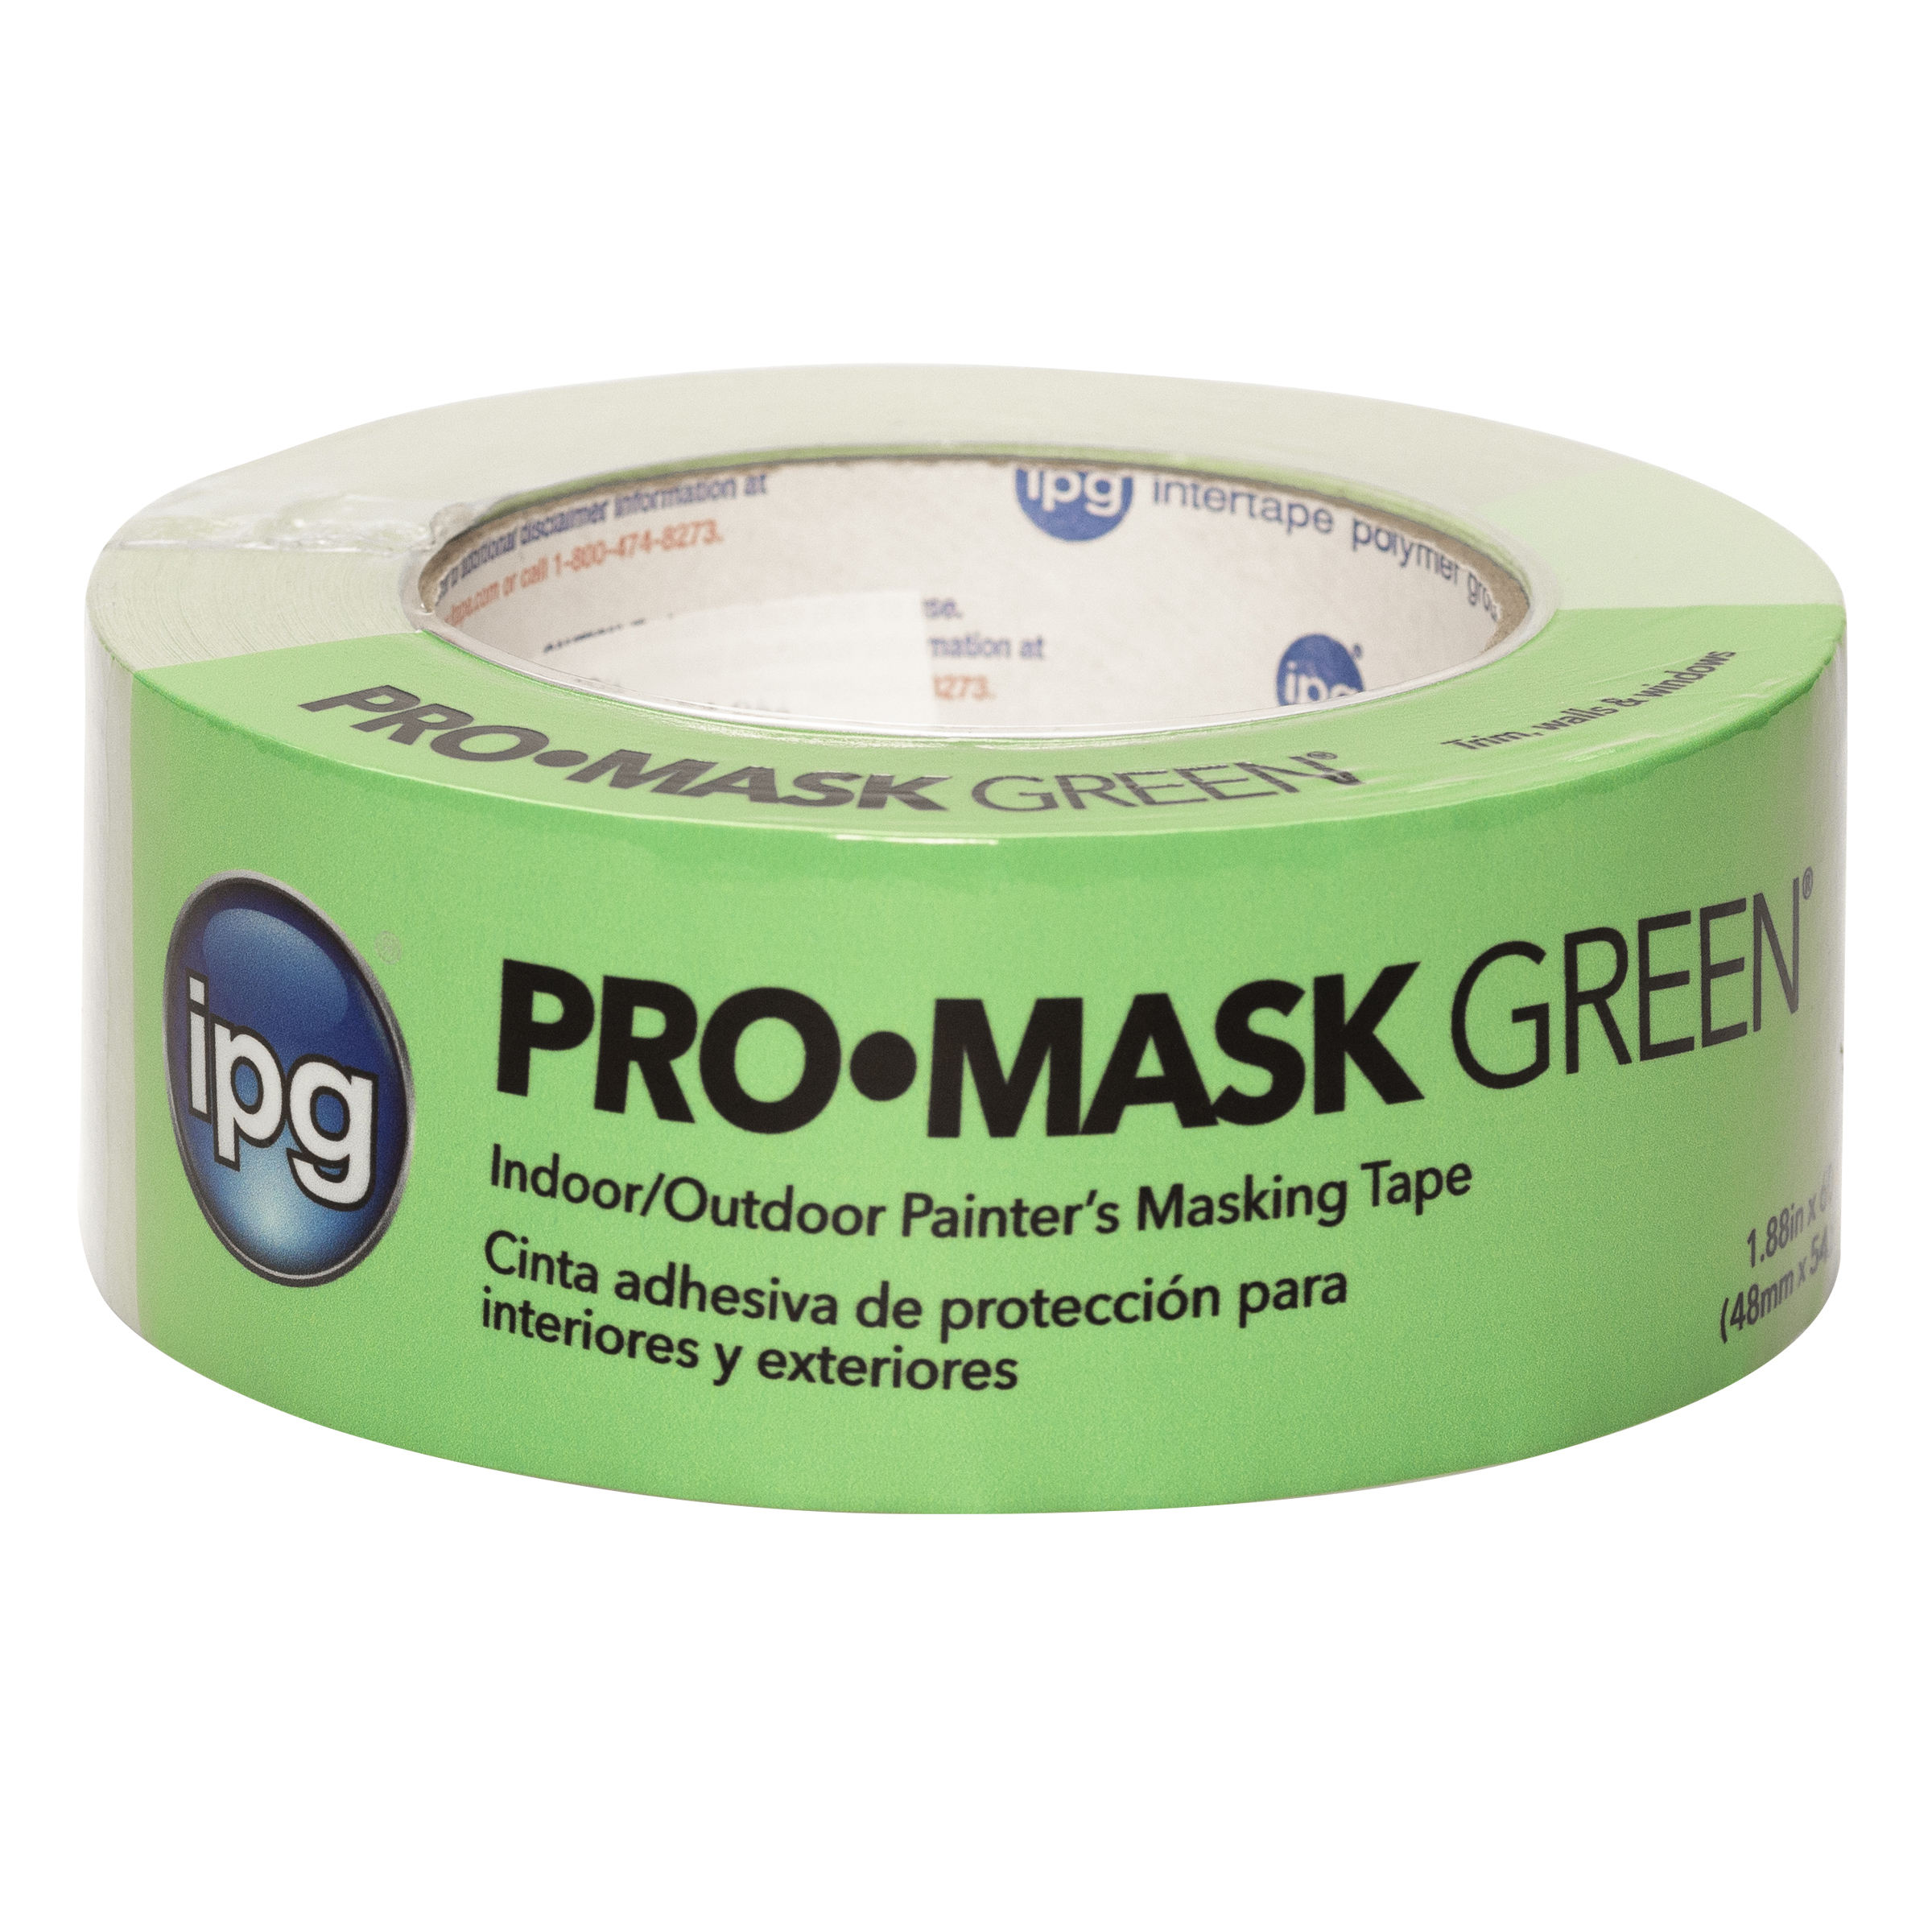 ProMask Green 1.41 Green Painter Tape 5804, 1 - Fry's Food Stores